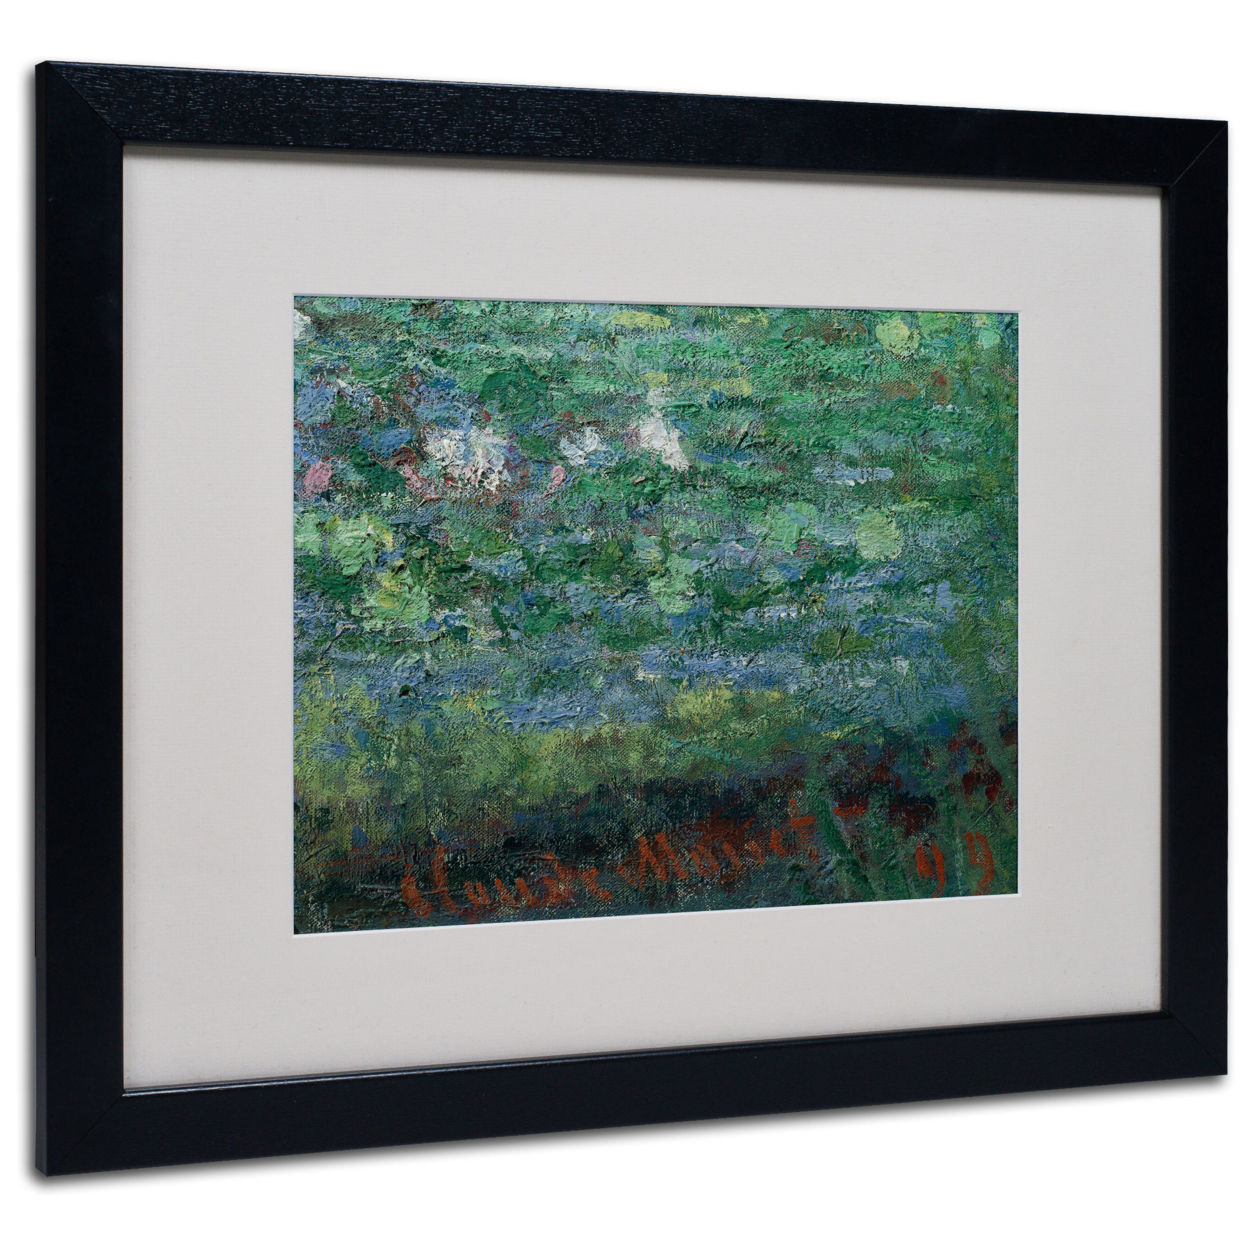 Claude Monet 'The Waterlily Pond Green' Black Wooden Framed Art 18 X 22 Inches